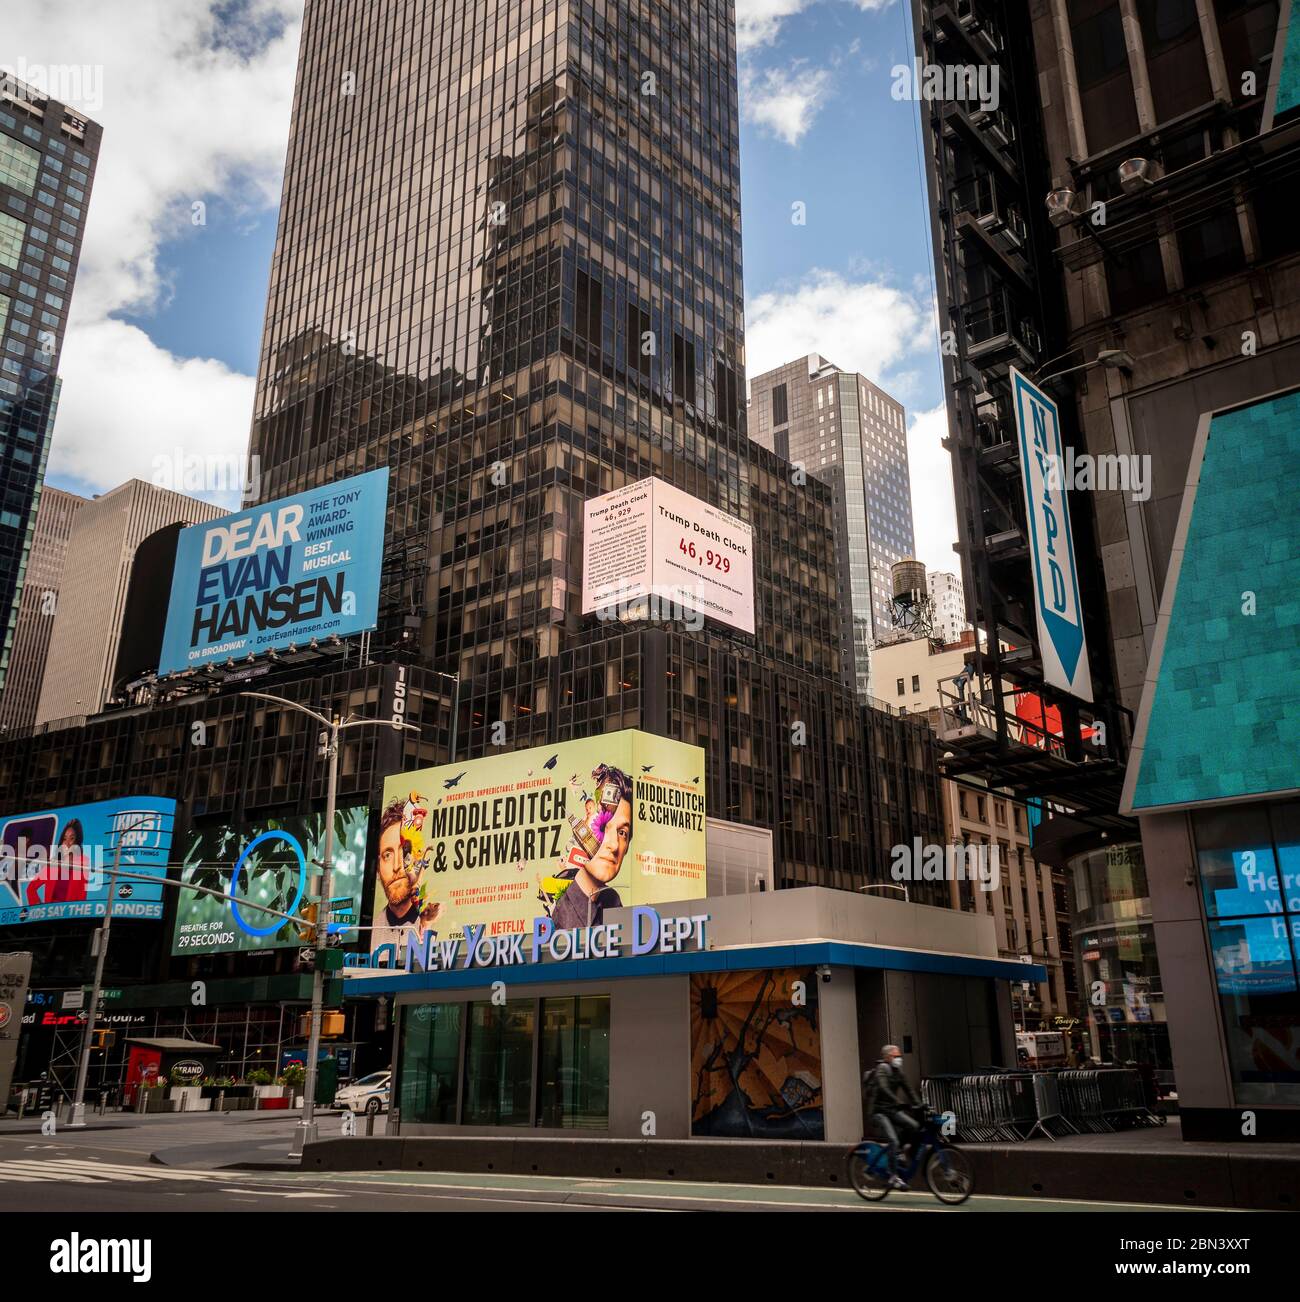 The “Trump Death Clock” billboard is seen in Times Square in New York on Saturday, May 9, 2020. The clock, originated by filmmaker Eugene Jarecki, shows the estimated amount of deaths in the U.S. from COVID-19 due to the delayed response from President Trump and other members of his staff.  (© Richard B. Levine) Stock Photo